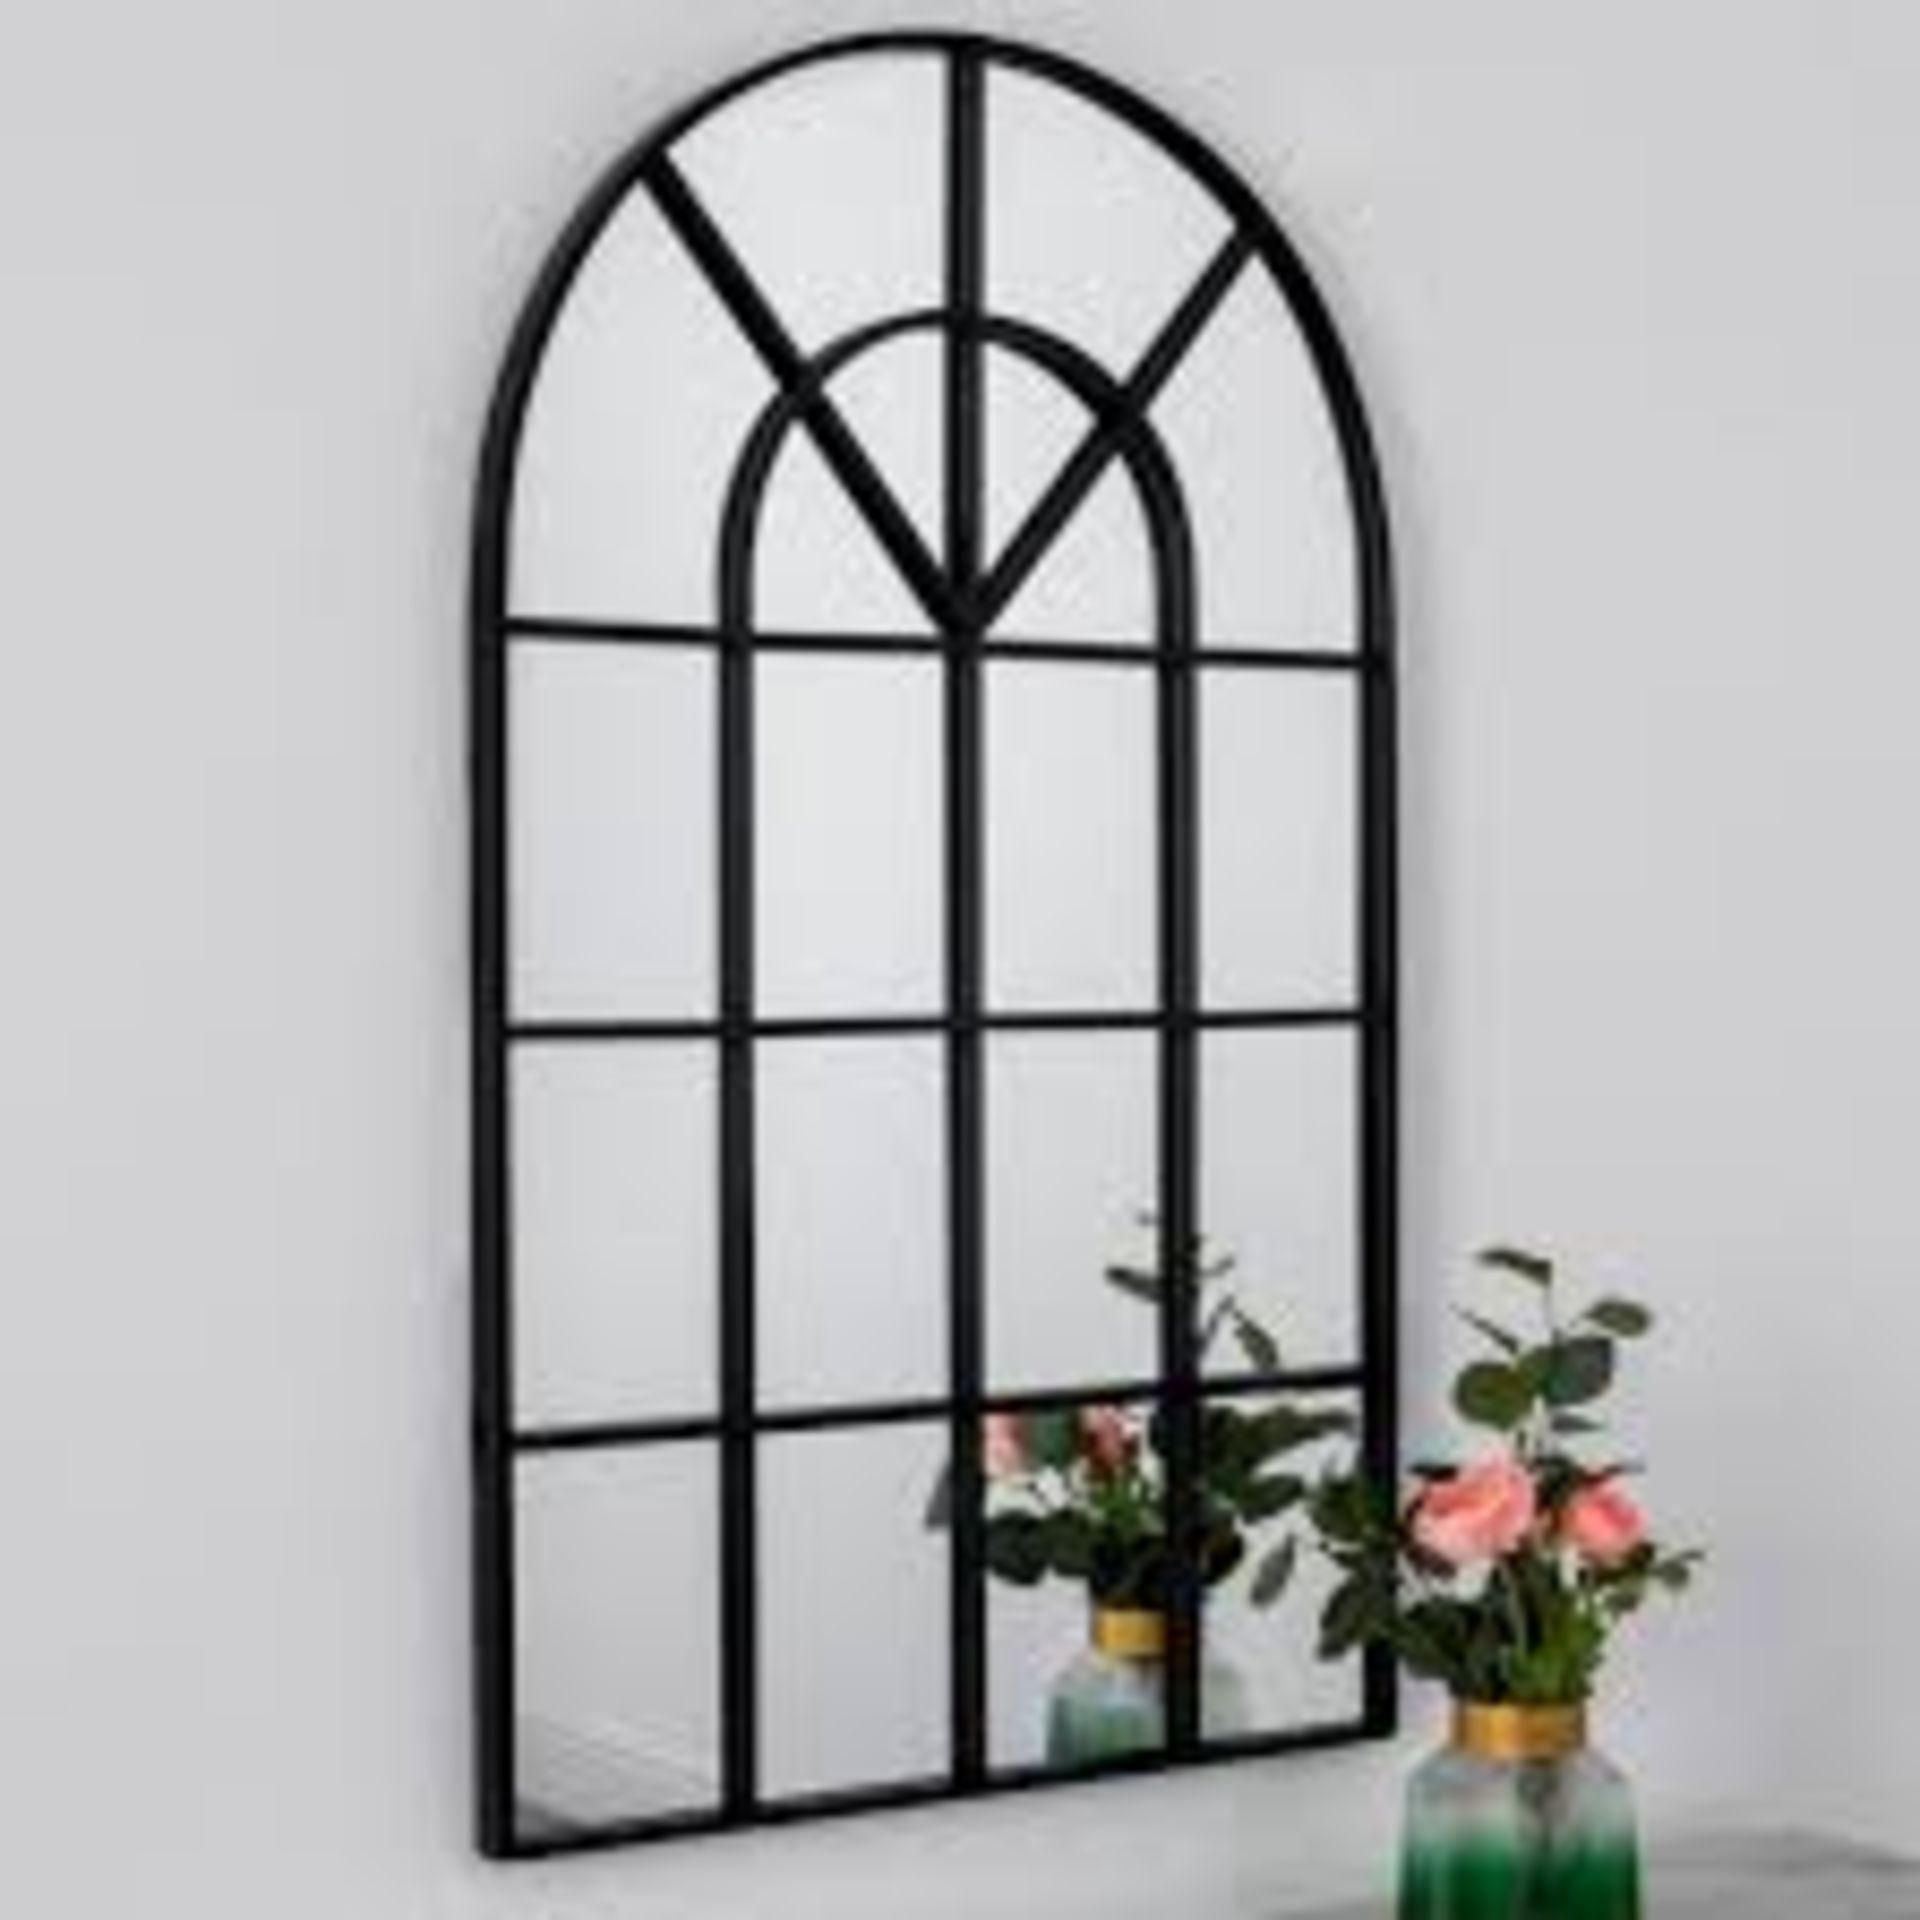 BRAND NEW Native Lifestyle Arched Rome Mirror 100 X 60 X 2CM RRP £210 EACH